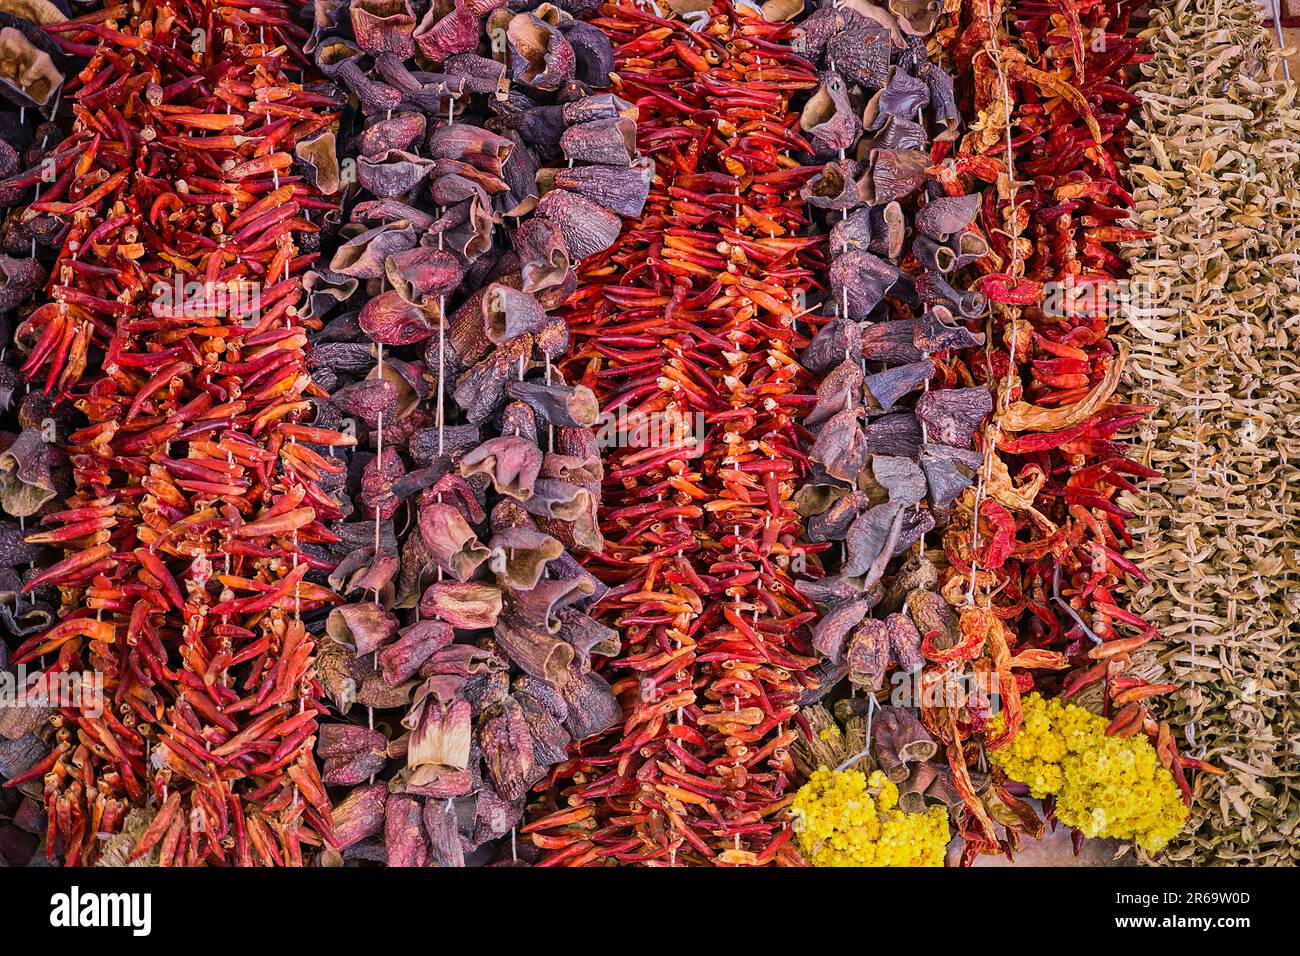 Dried vegetables at a traditional bazaar in Turkey on the Aegean coast. Dry raw red pepper, eggplant and okra hang in front of the bench Stock Photo